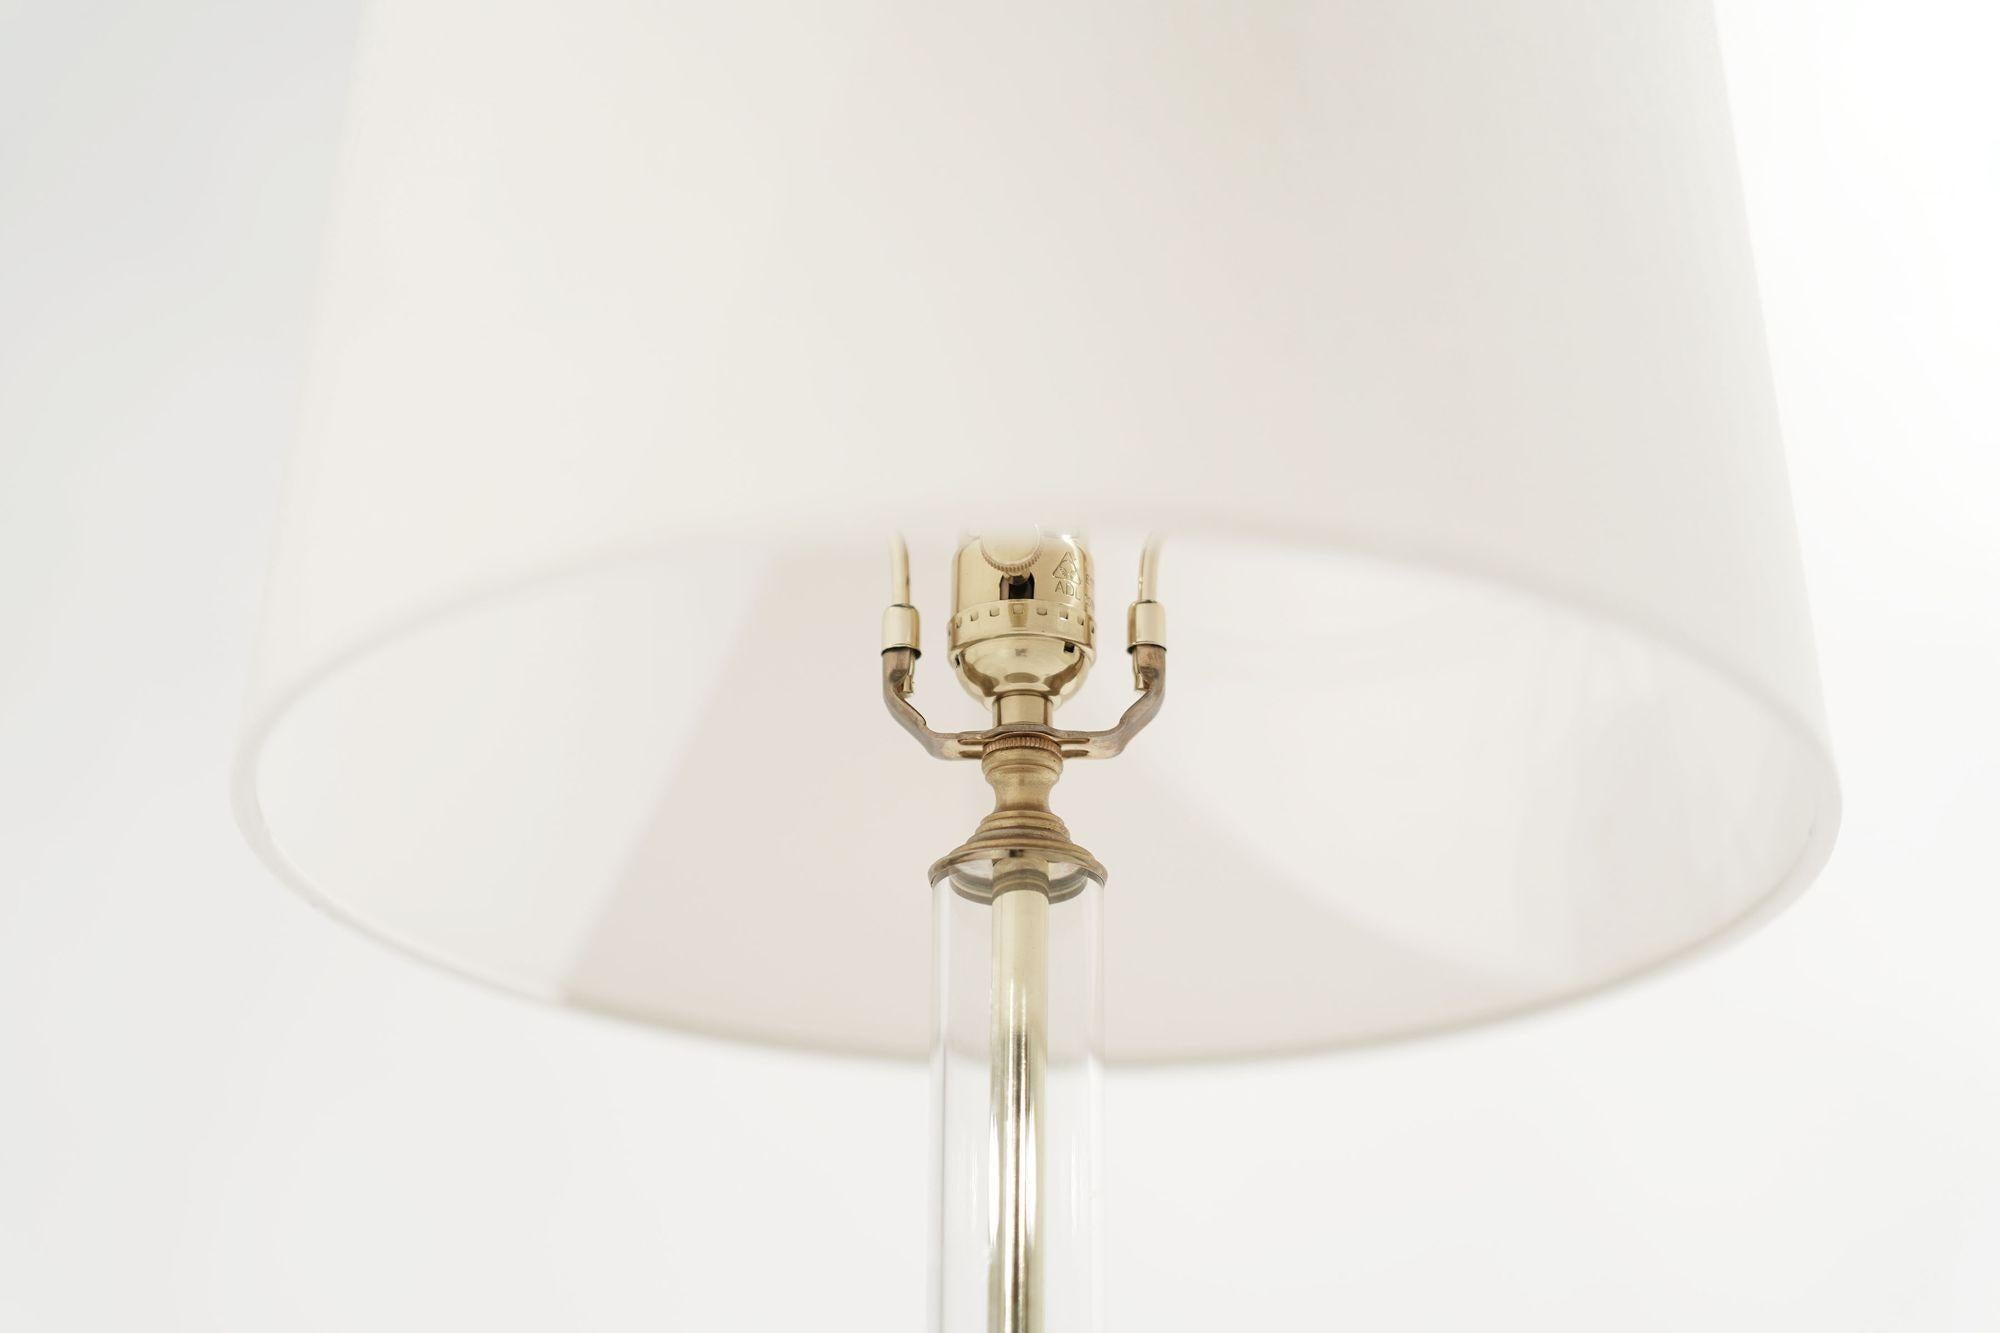 Glass and Brass Table Lamps, C. 1960s For Sale 3